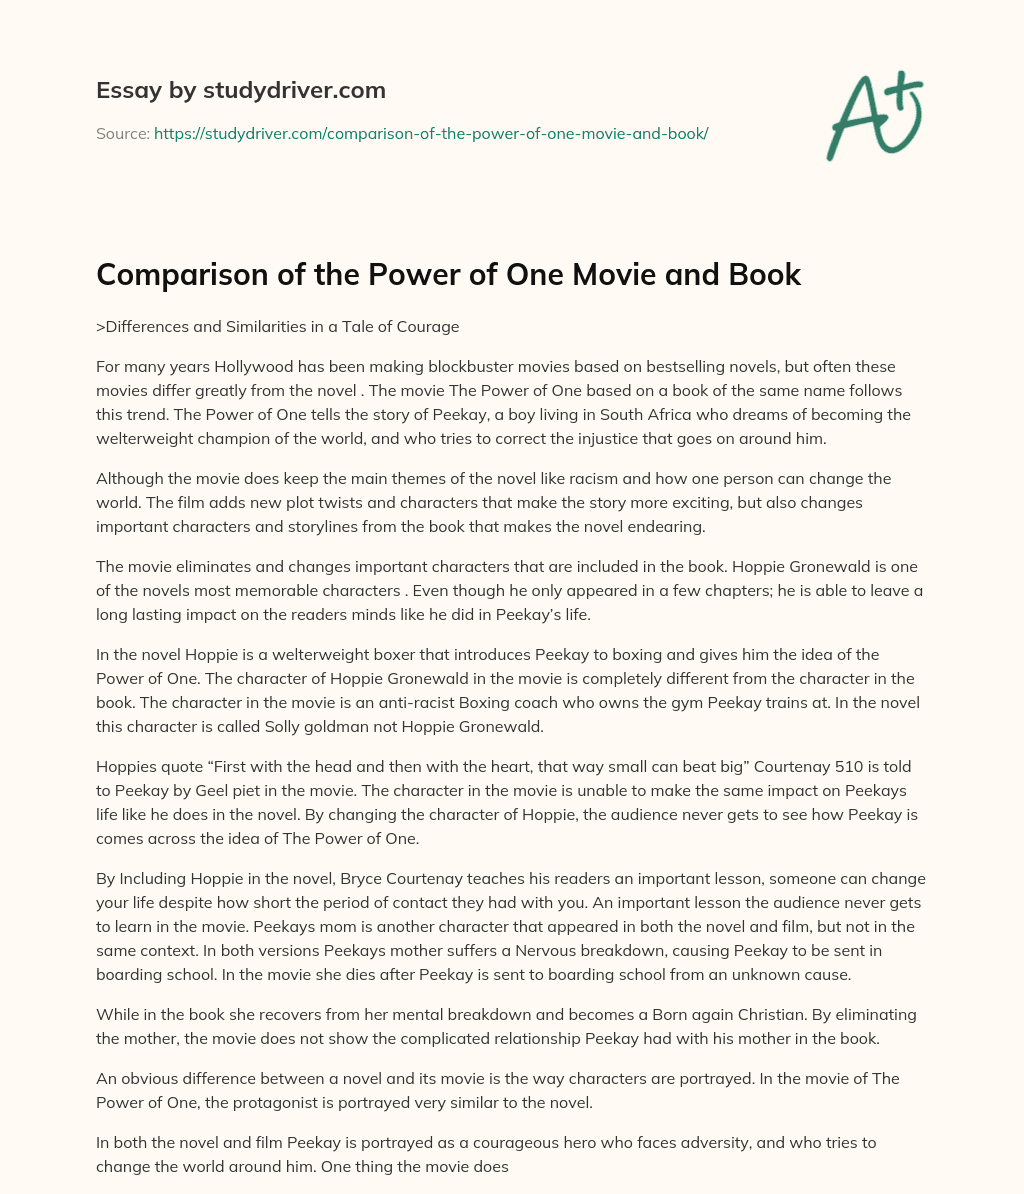 Comparison of the Power of One Movie and Book essay